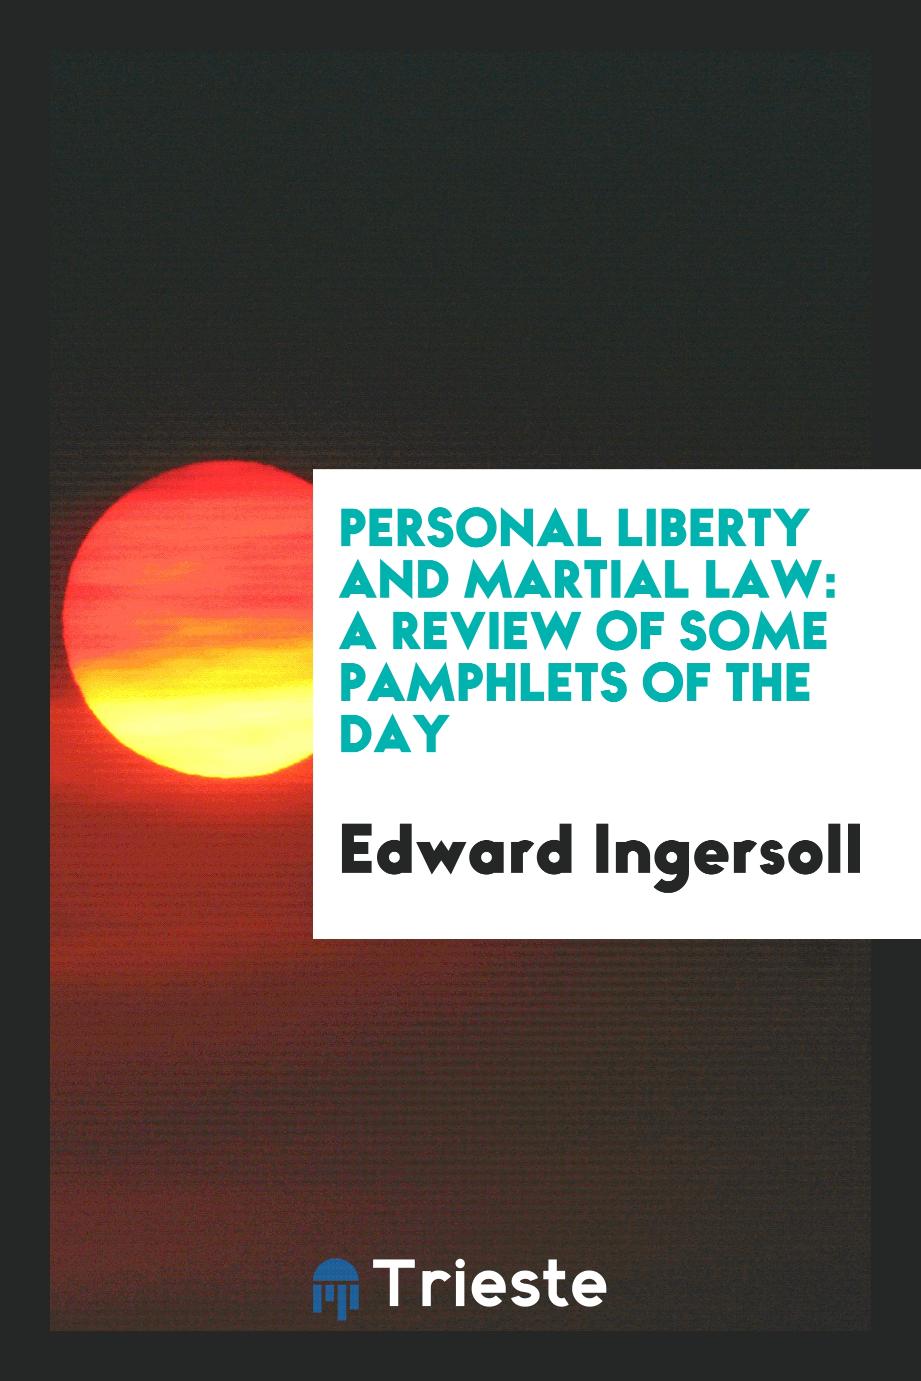 Personal Liberty and Martial Law: A Review of Some Pamphlets of the Day